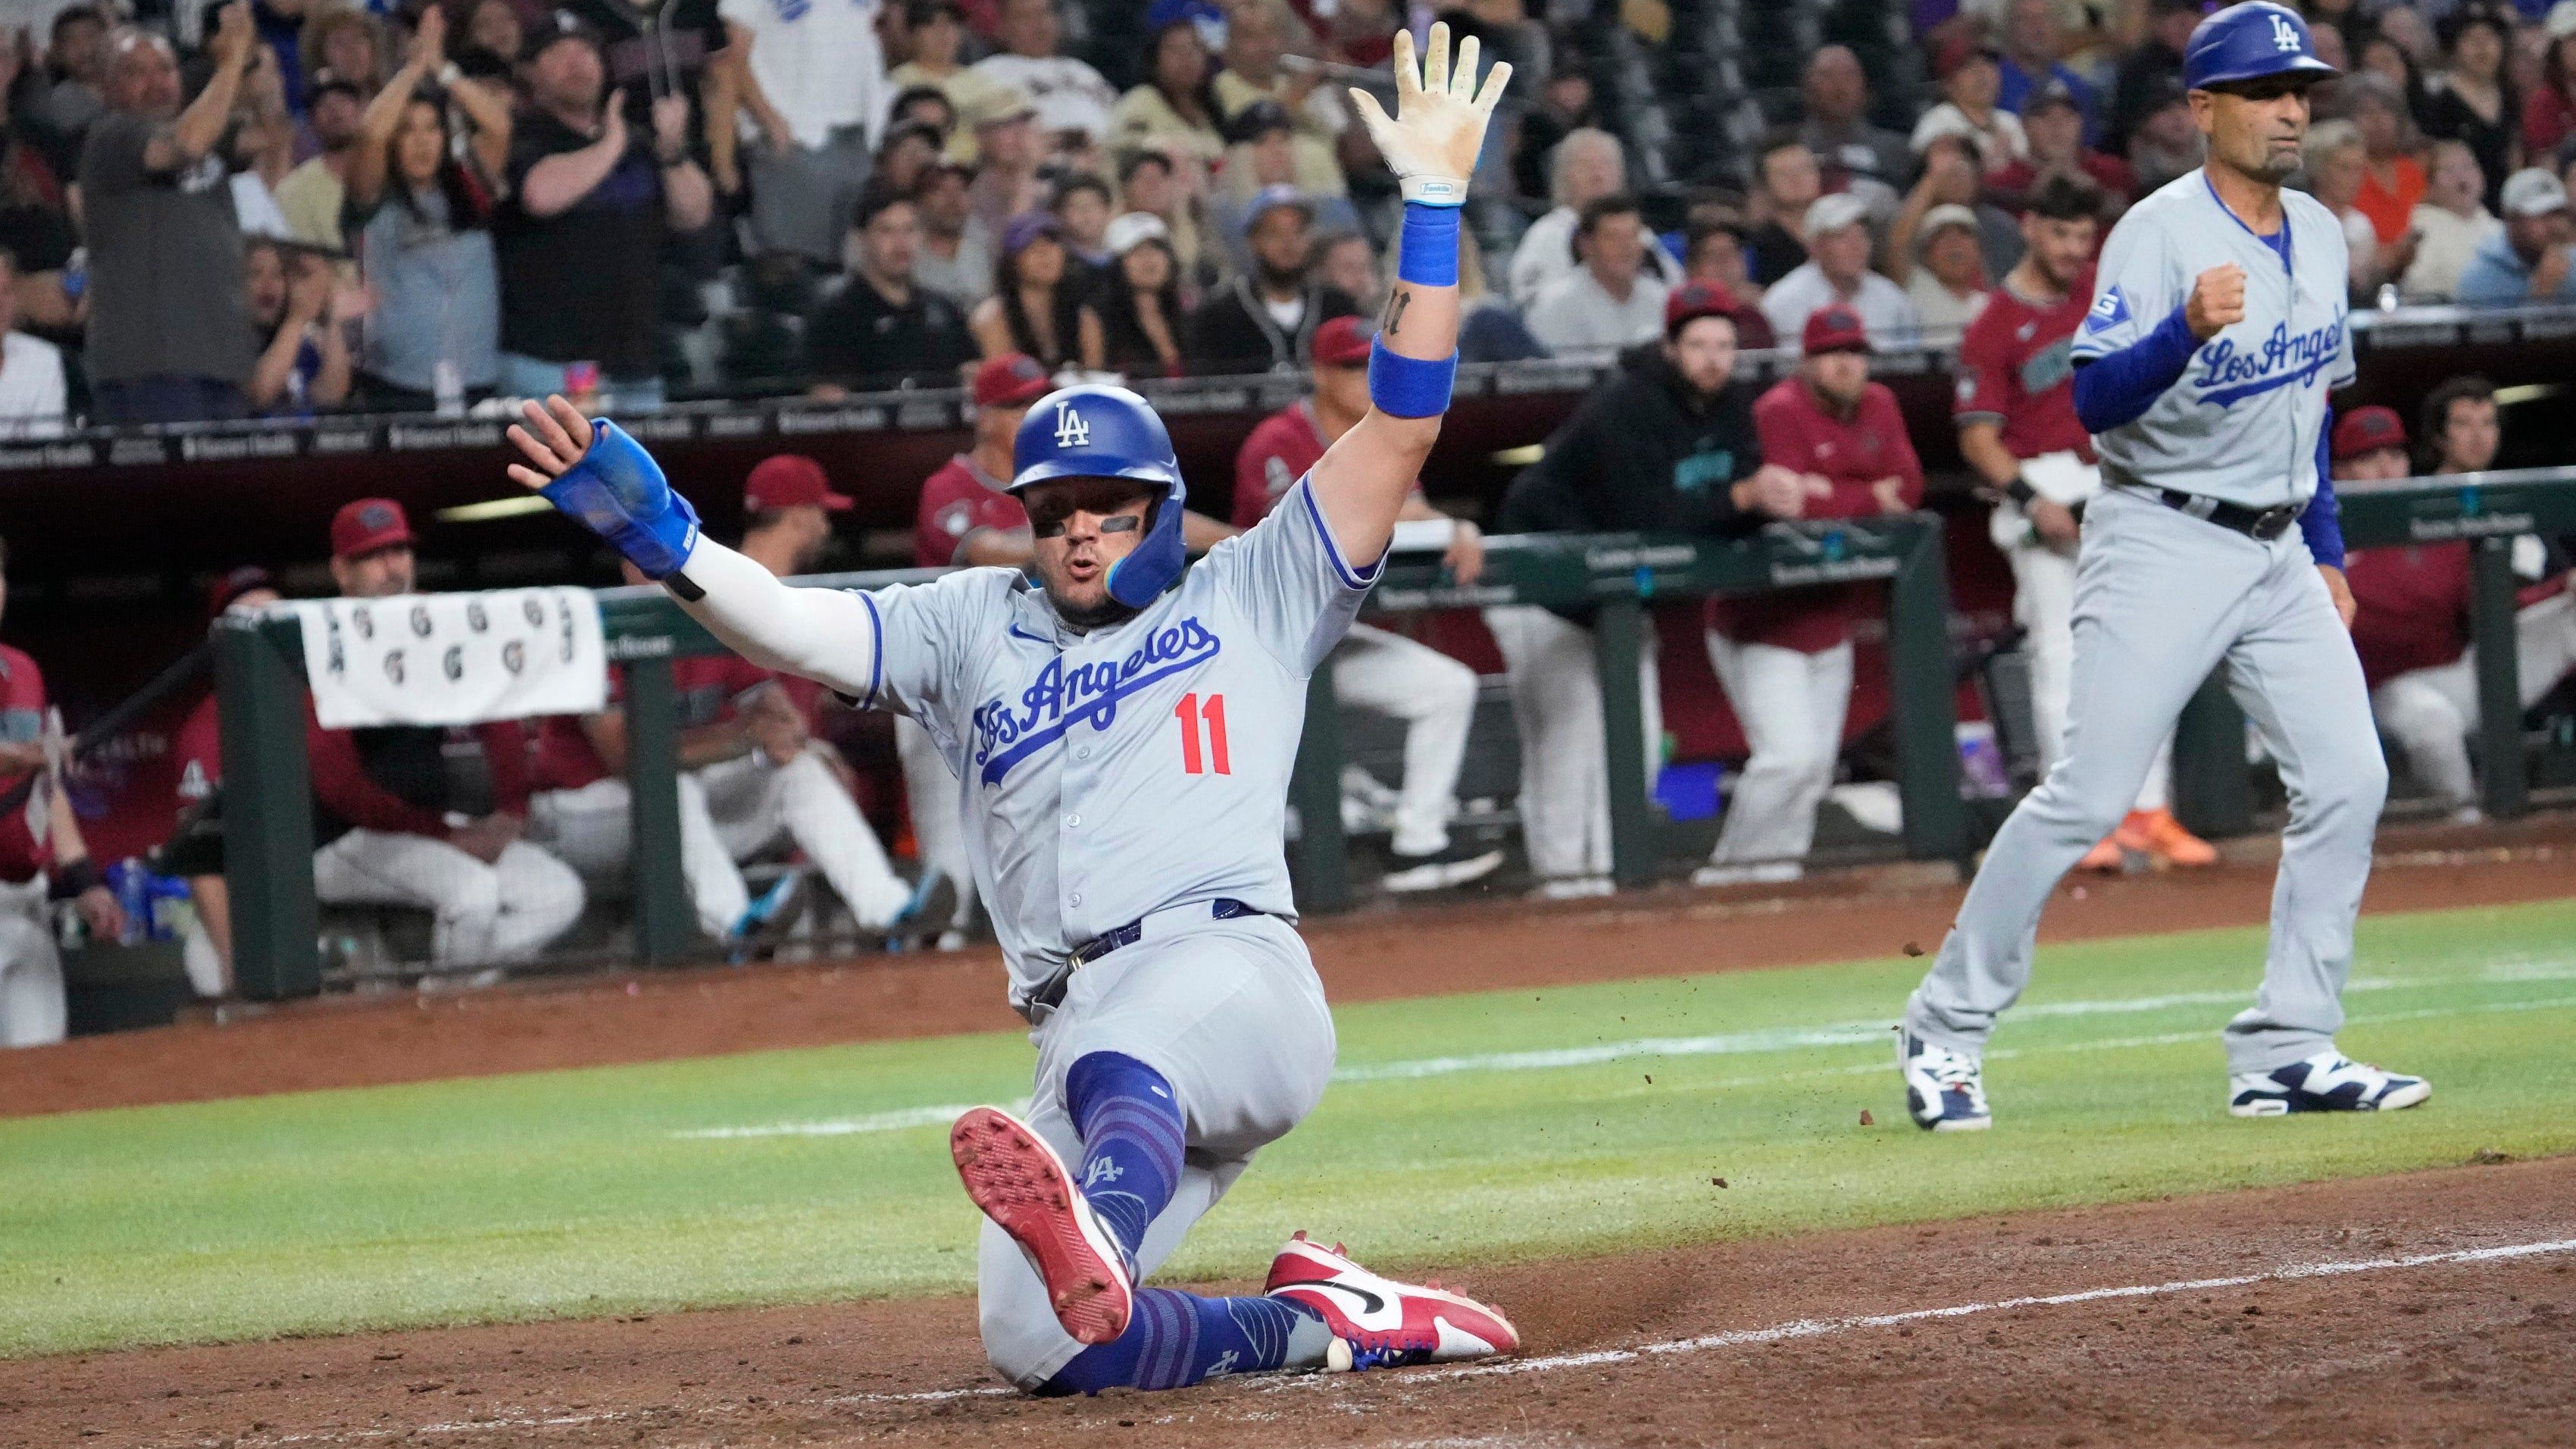 Los Angeles Dodgers’ Miguel Rojas (11) scores against the Arizona Diamondbacks during the eighth inning.